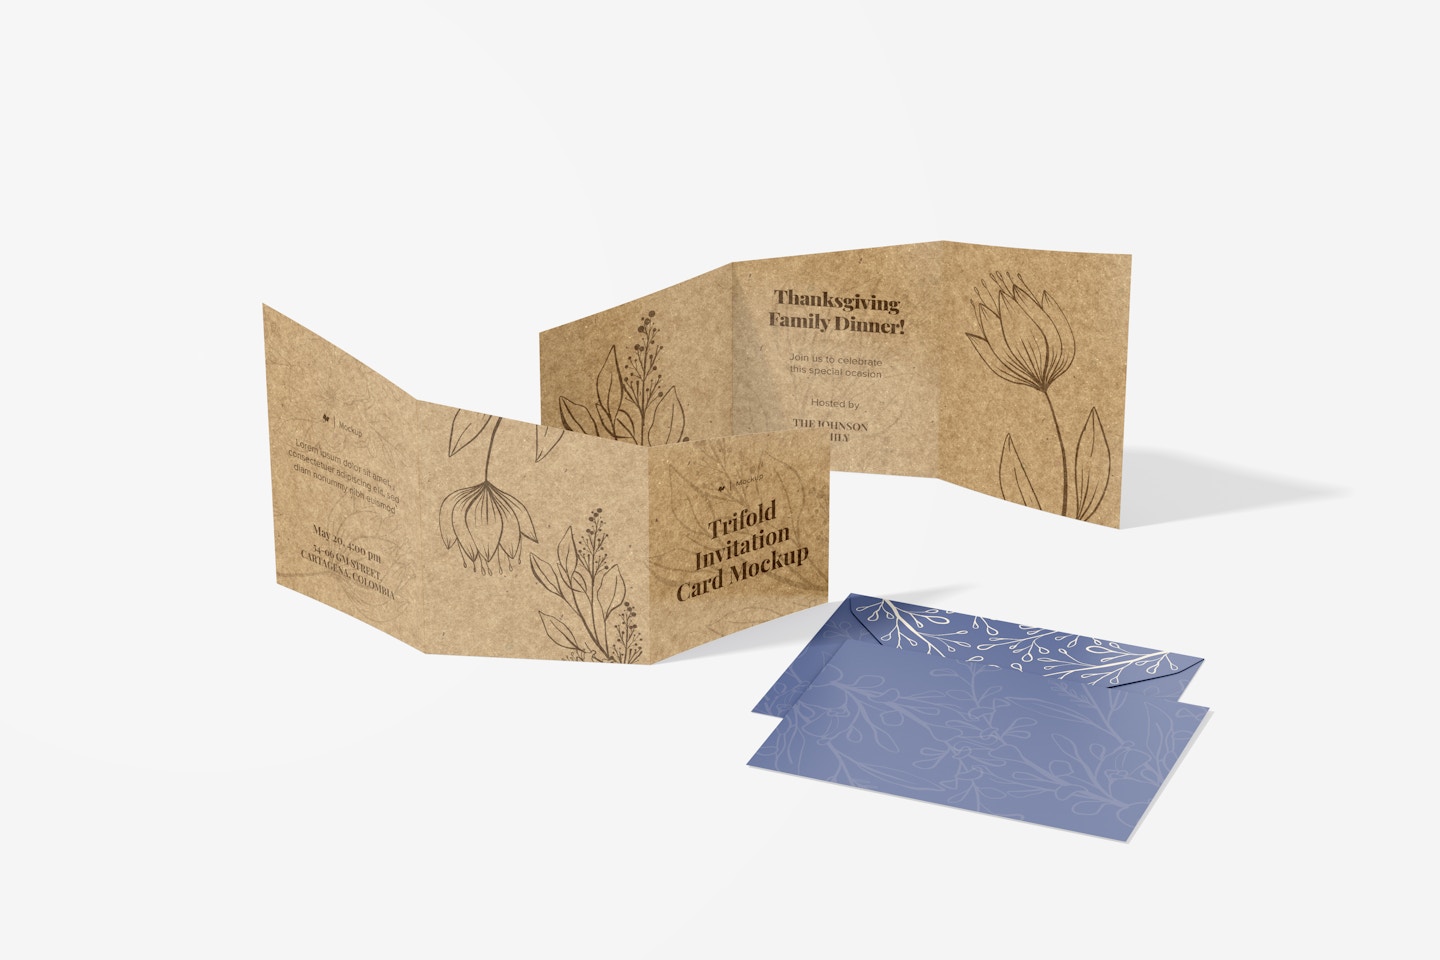 Trifold Invitation Card Mockup, Front View